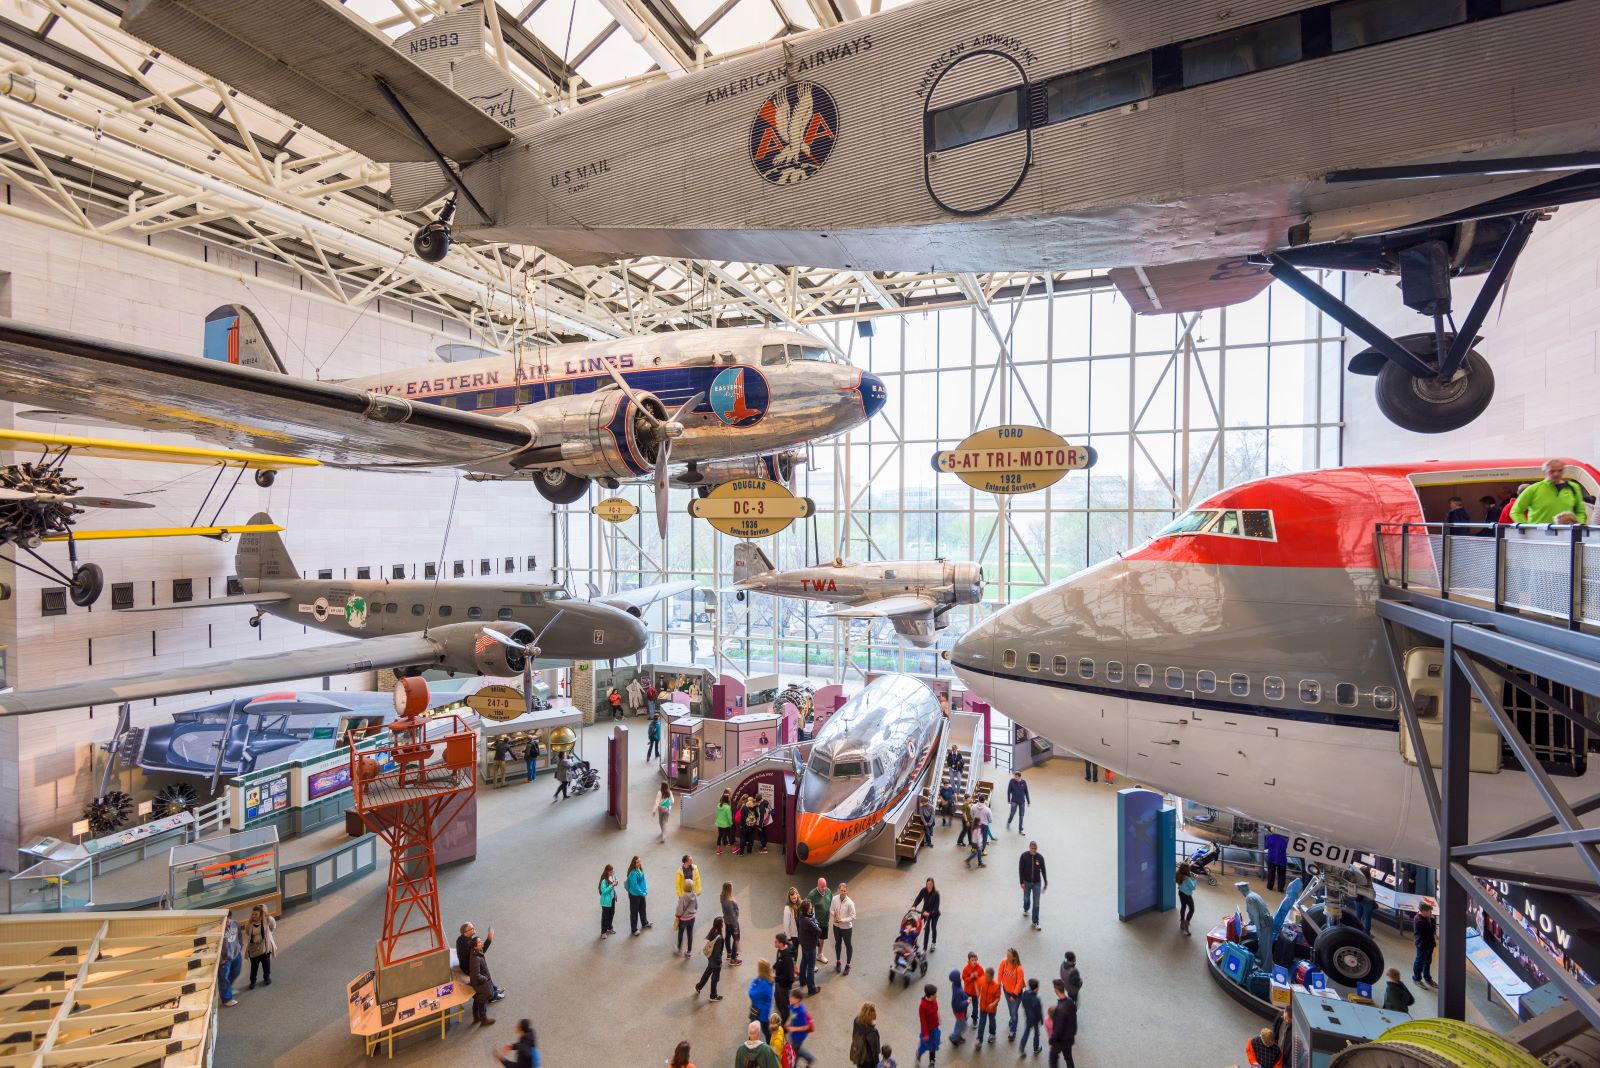 Image credit: Shutterstock / Sean Pavone <p>Located on Ford Island, this museum houses WWII aircraft and personal stories of the aviators who flew them, offering insights into the aerial aspects of the attack.</p>